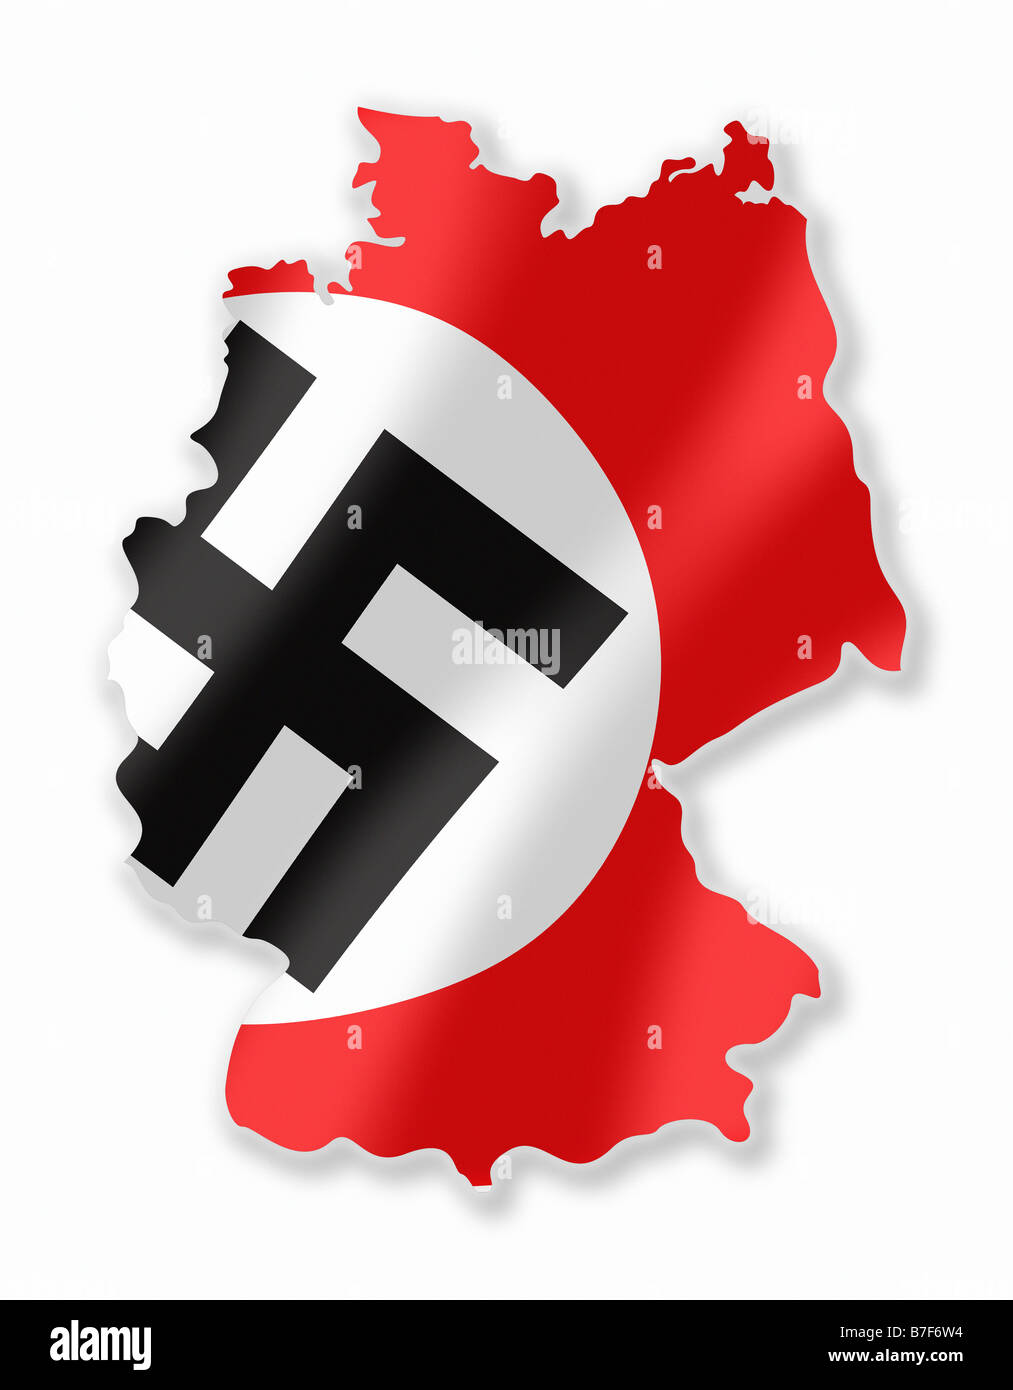 Nazi Flag Third Reich Waving In German Country Shape/Map Stock Photo